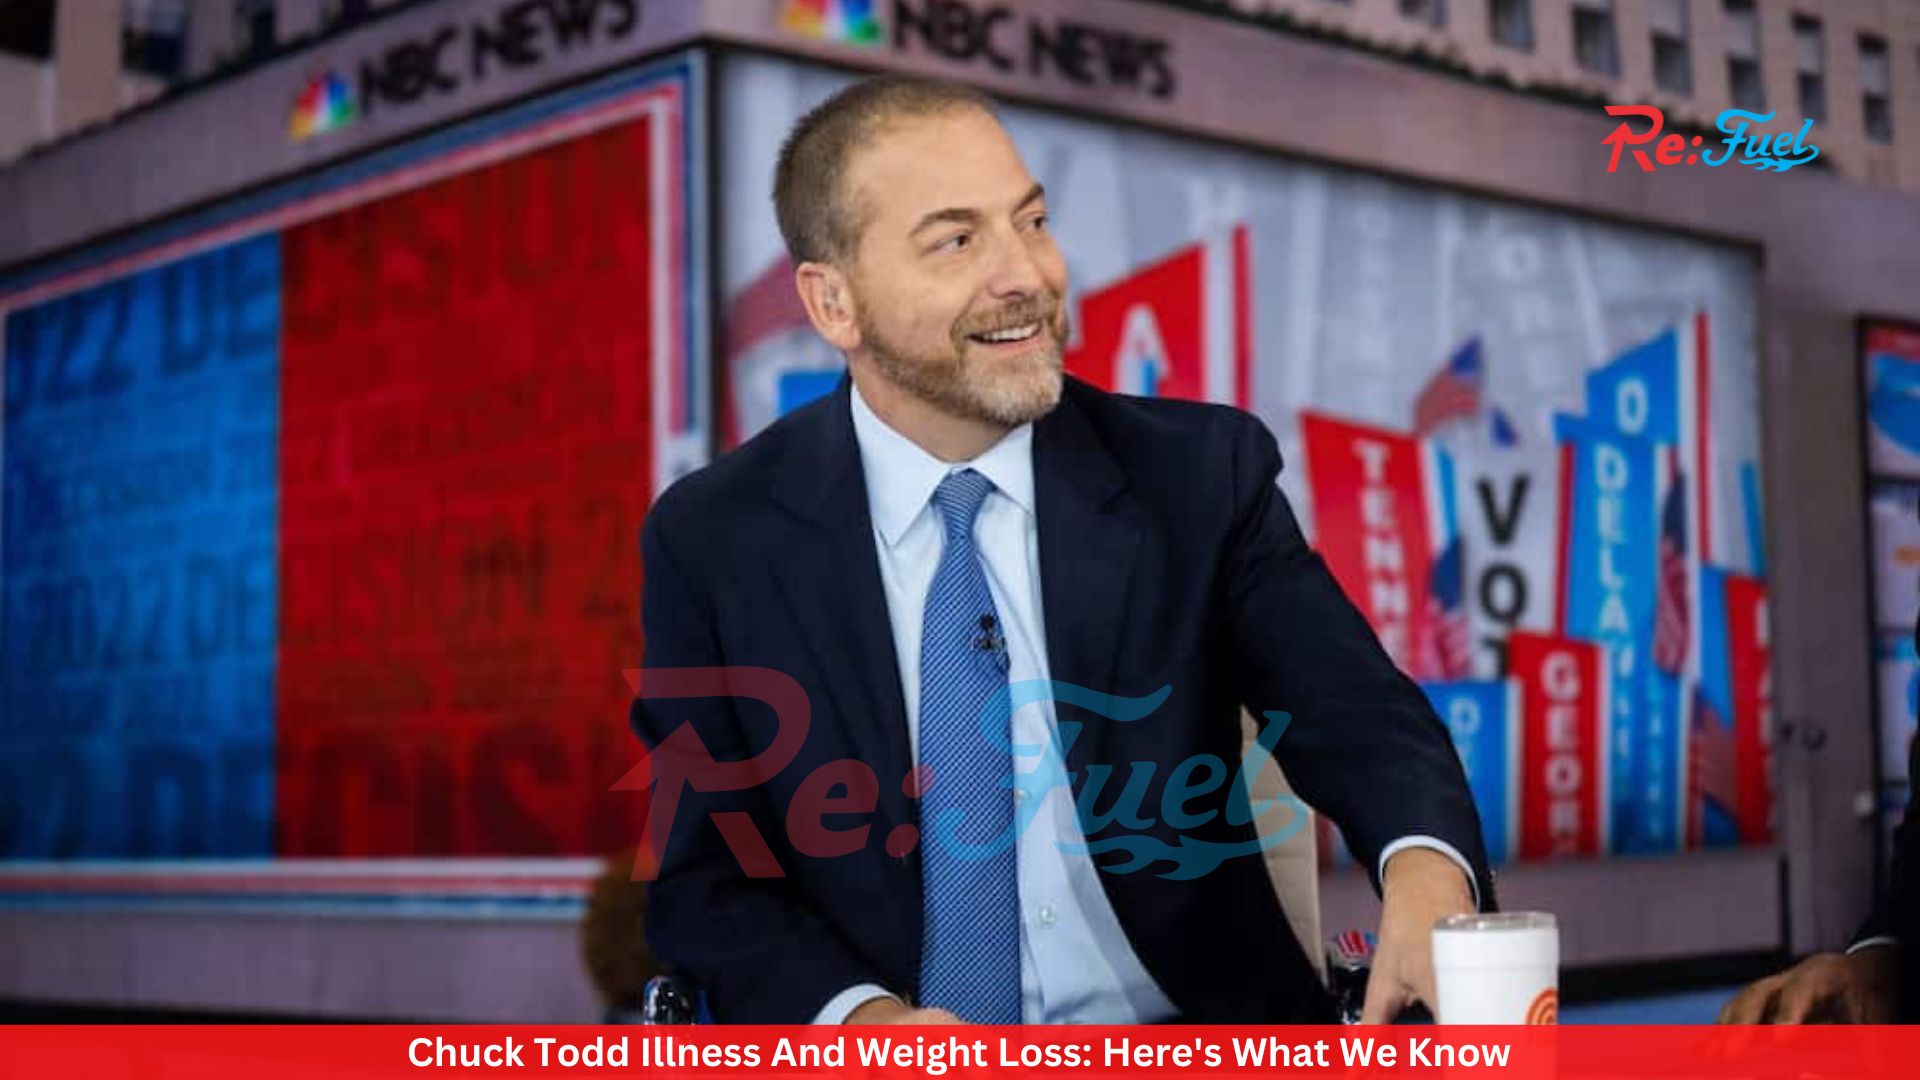 Chuck Todd Illness And Weight Loss: Here's What We Know